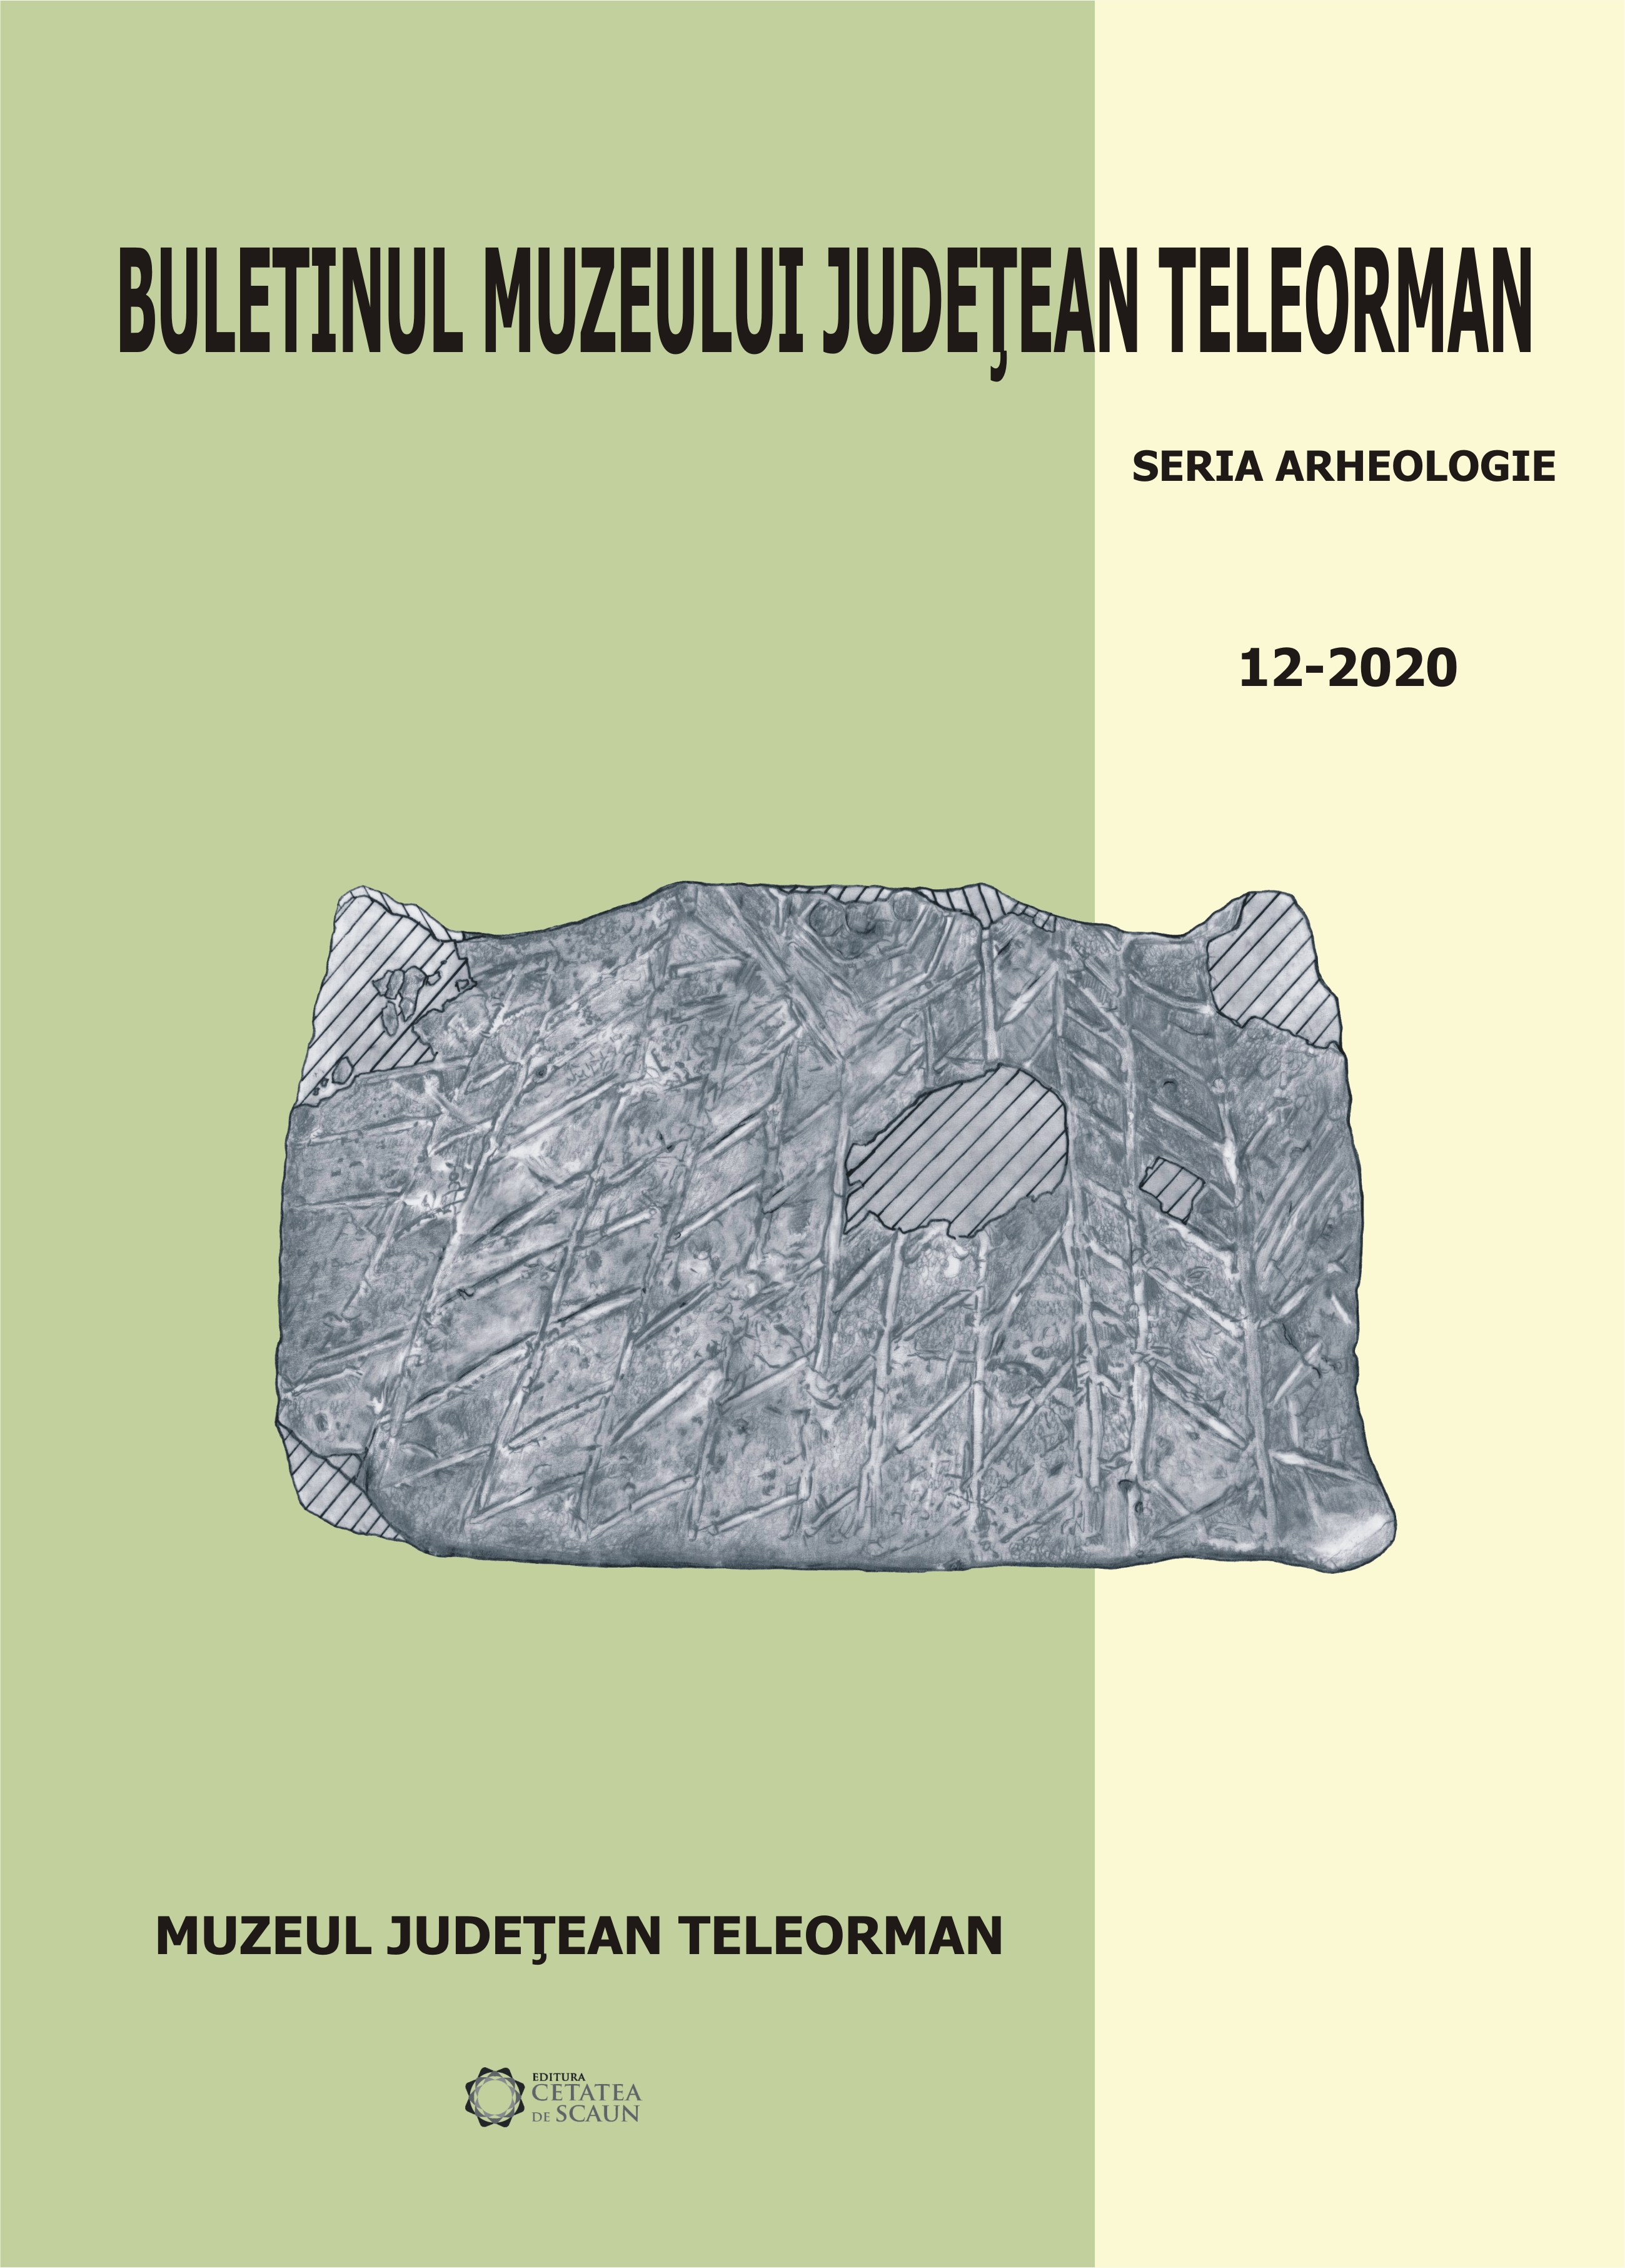 Flint caches discovered at Urlați Gumelnița settlement (Prahova County). Imports and local production Cover Image